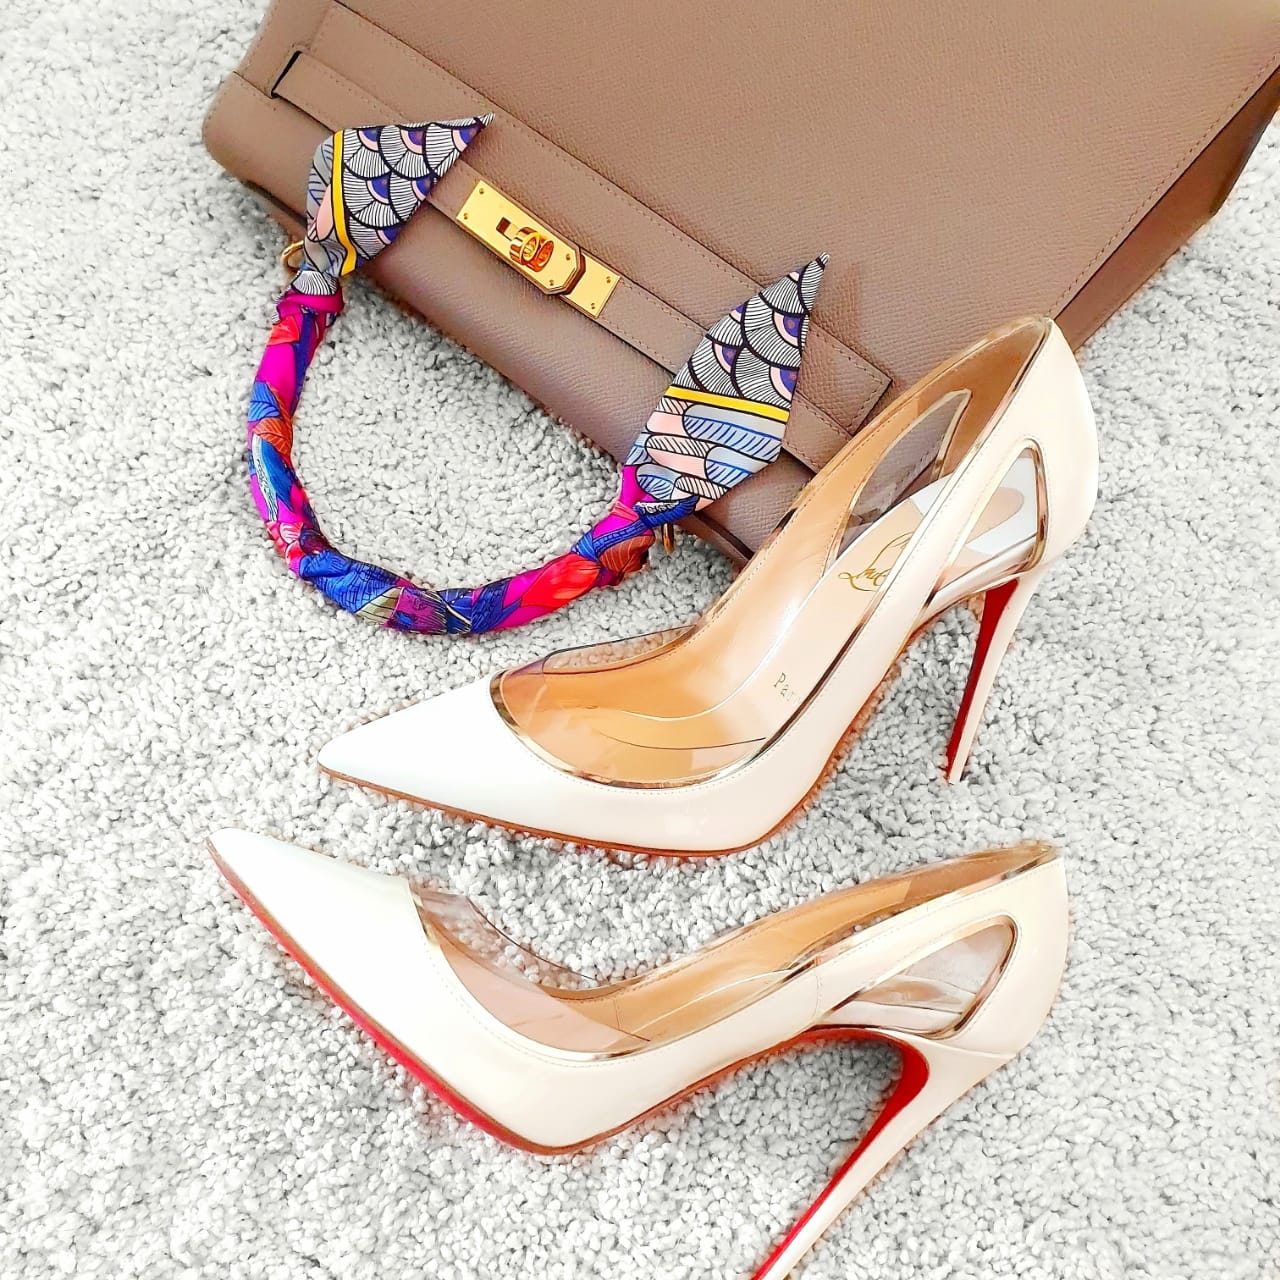 Explore the story behind the Brand: Christian Louboutin